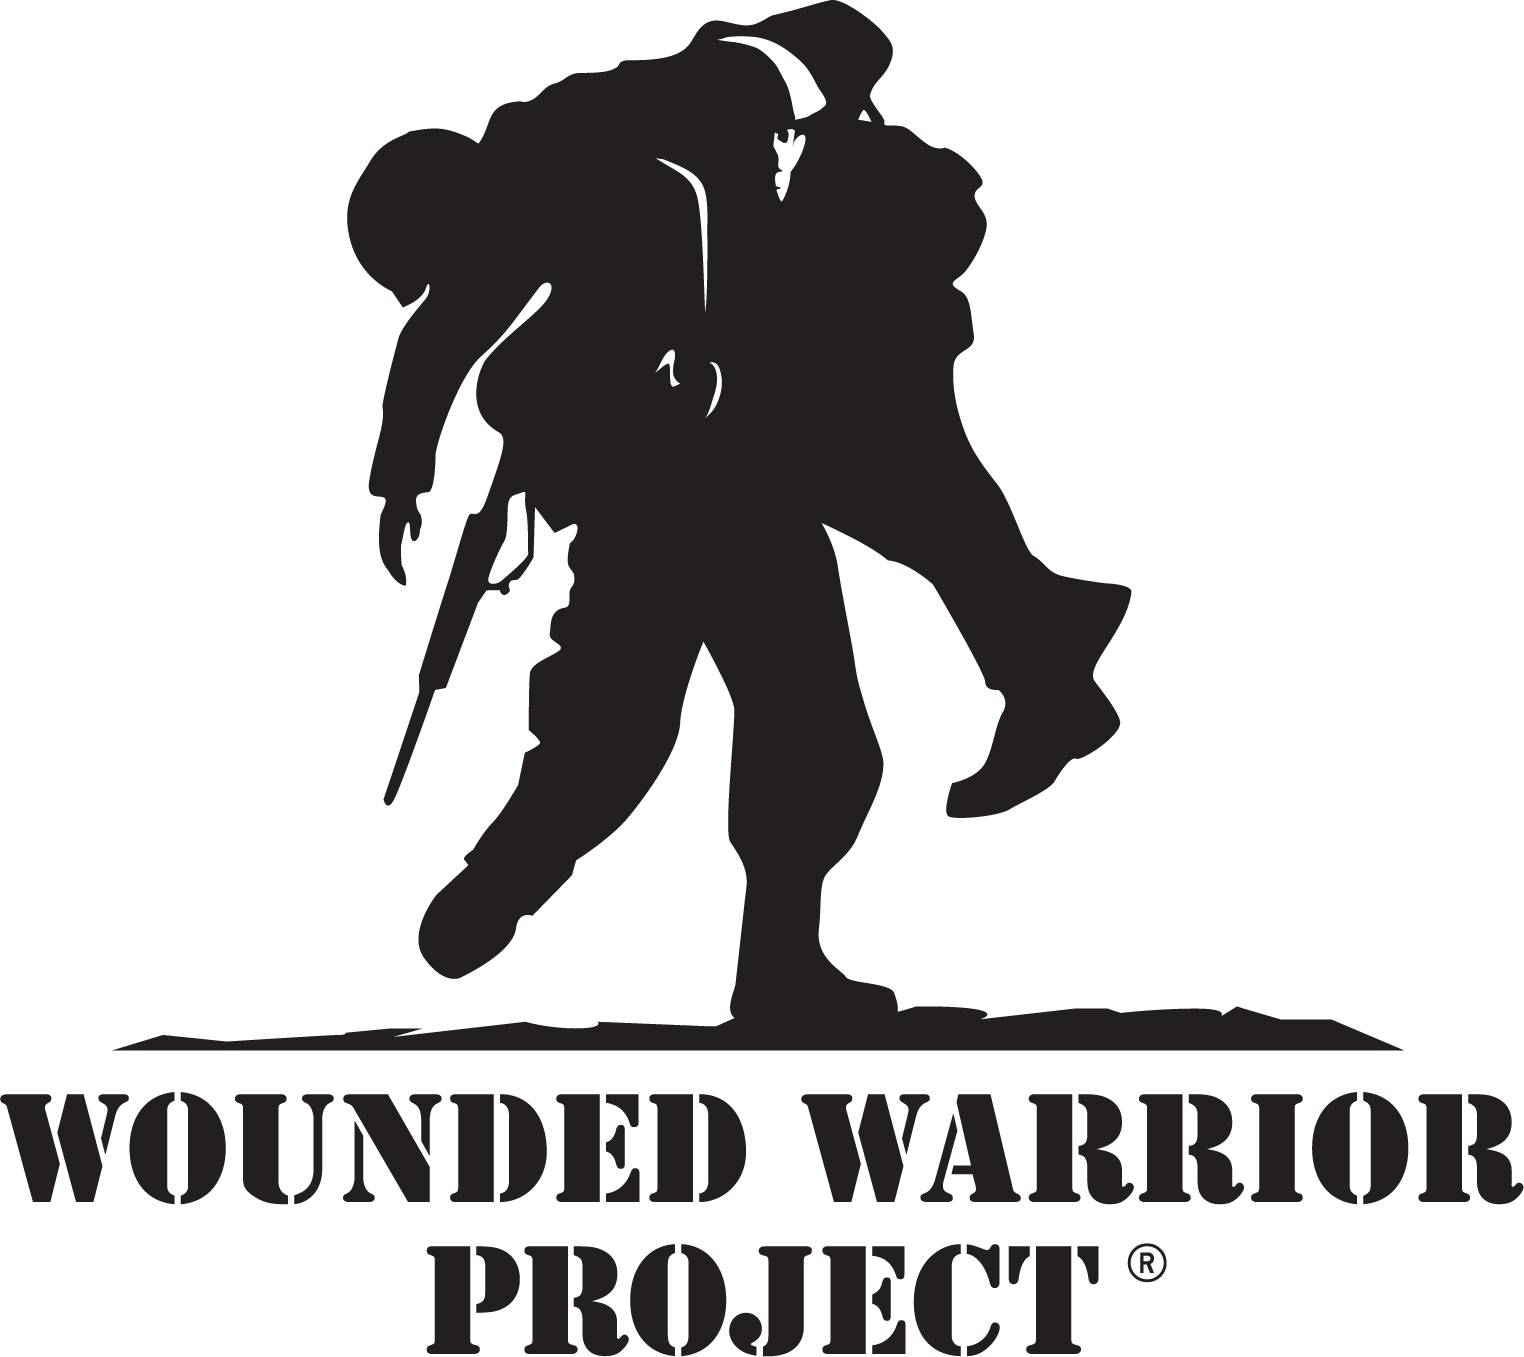 Wounded_Warrior_Logo_RGB